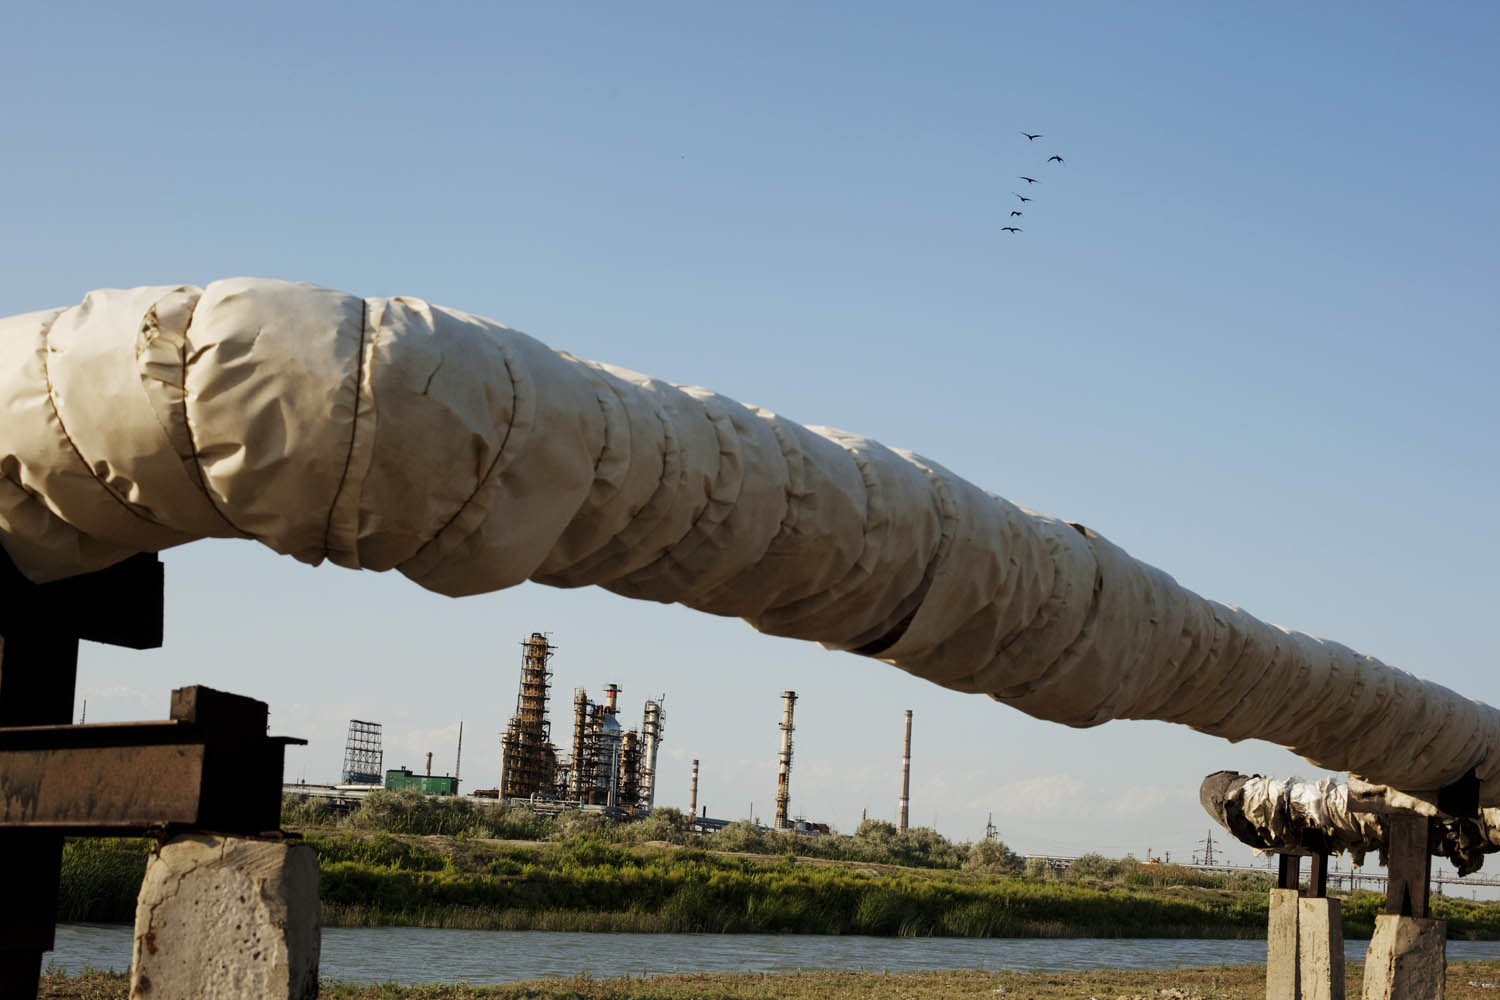 Atyrau oil refinery, which will soon be renovated and expanded with the help of Chinese investment. As the output of the refinery grows, it is likely that the pollution dropped into the canal on its edge will also.